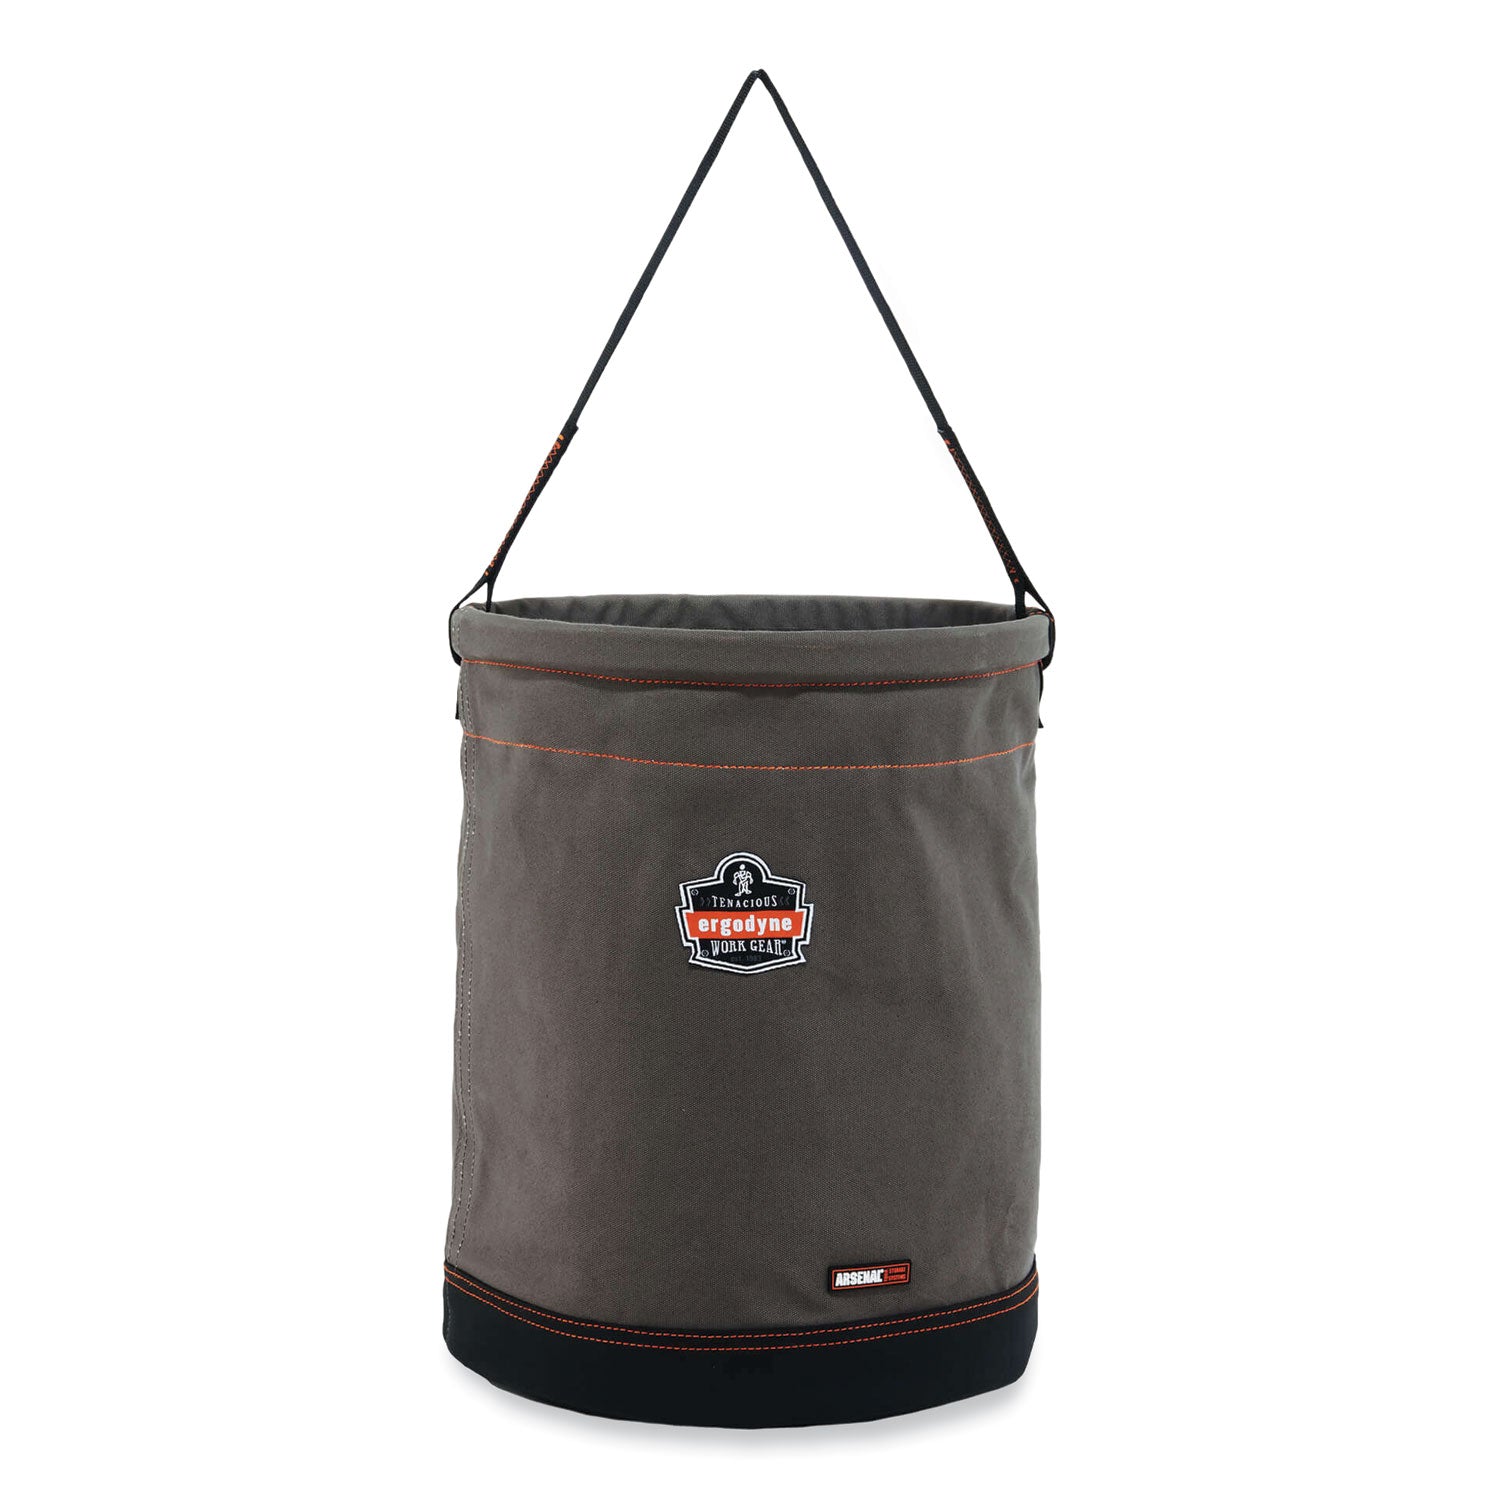 arsenal-5935-extra-large-web-handle-canvas-hoist-bucket-150-lb-gray-ships-in-1-3-business-days_ego14935 - 1